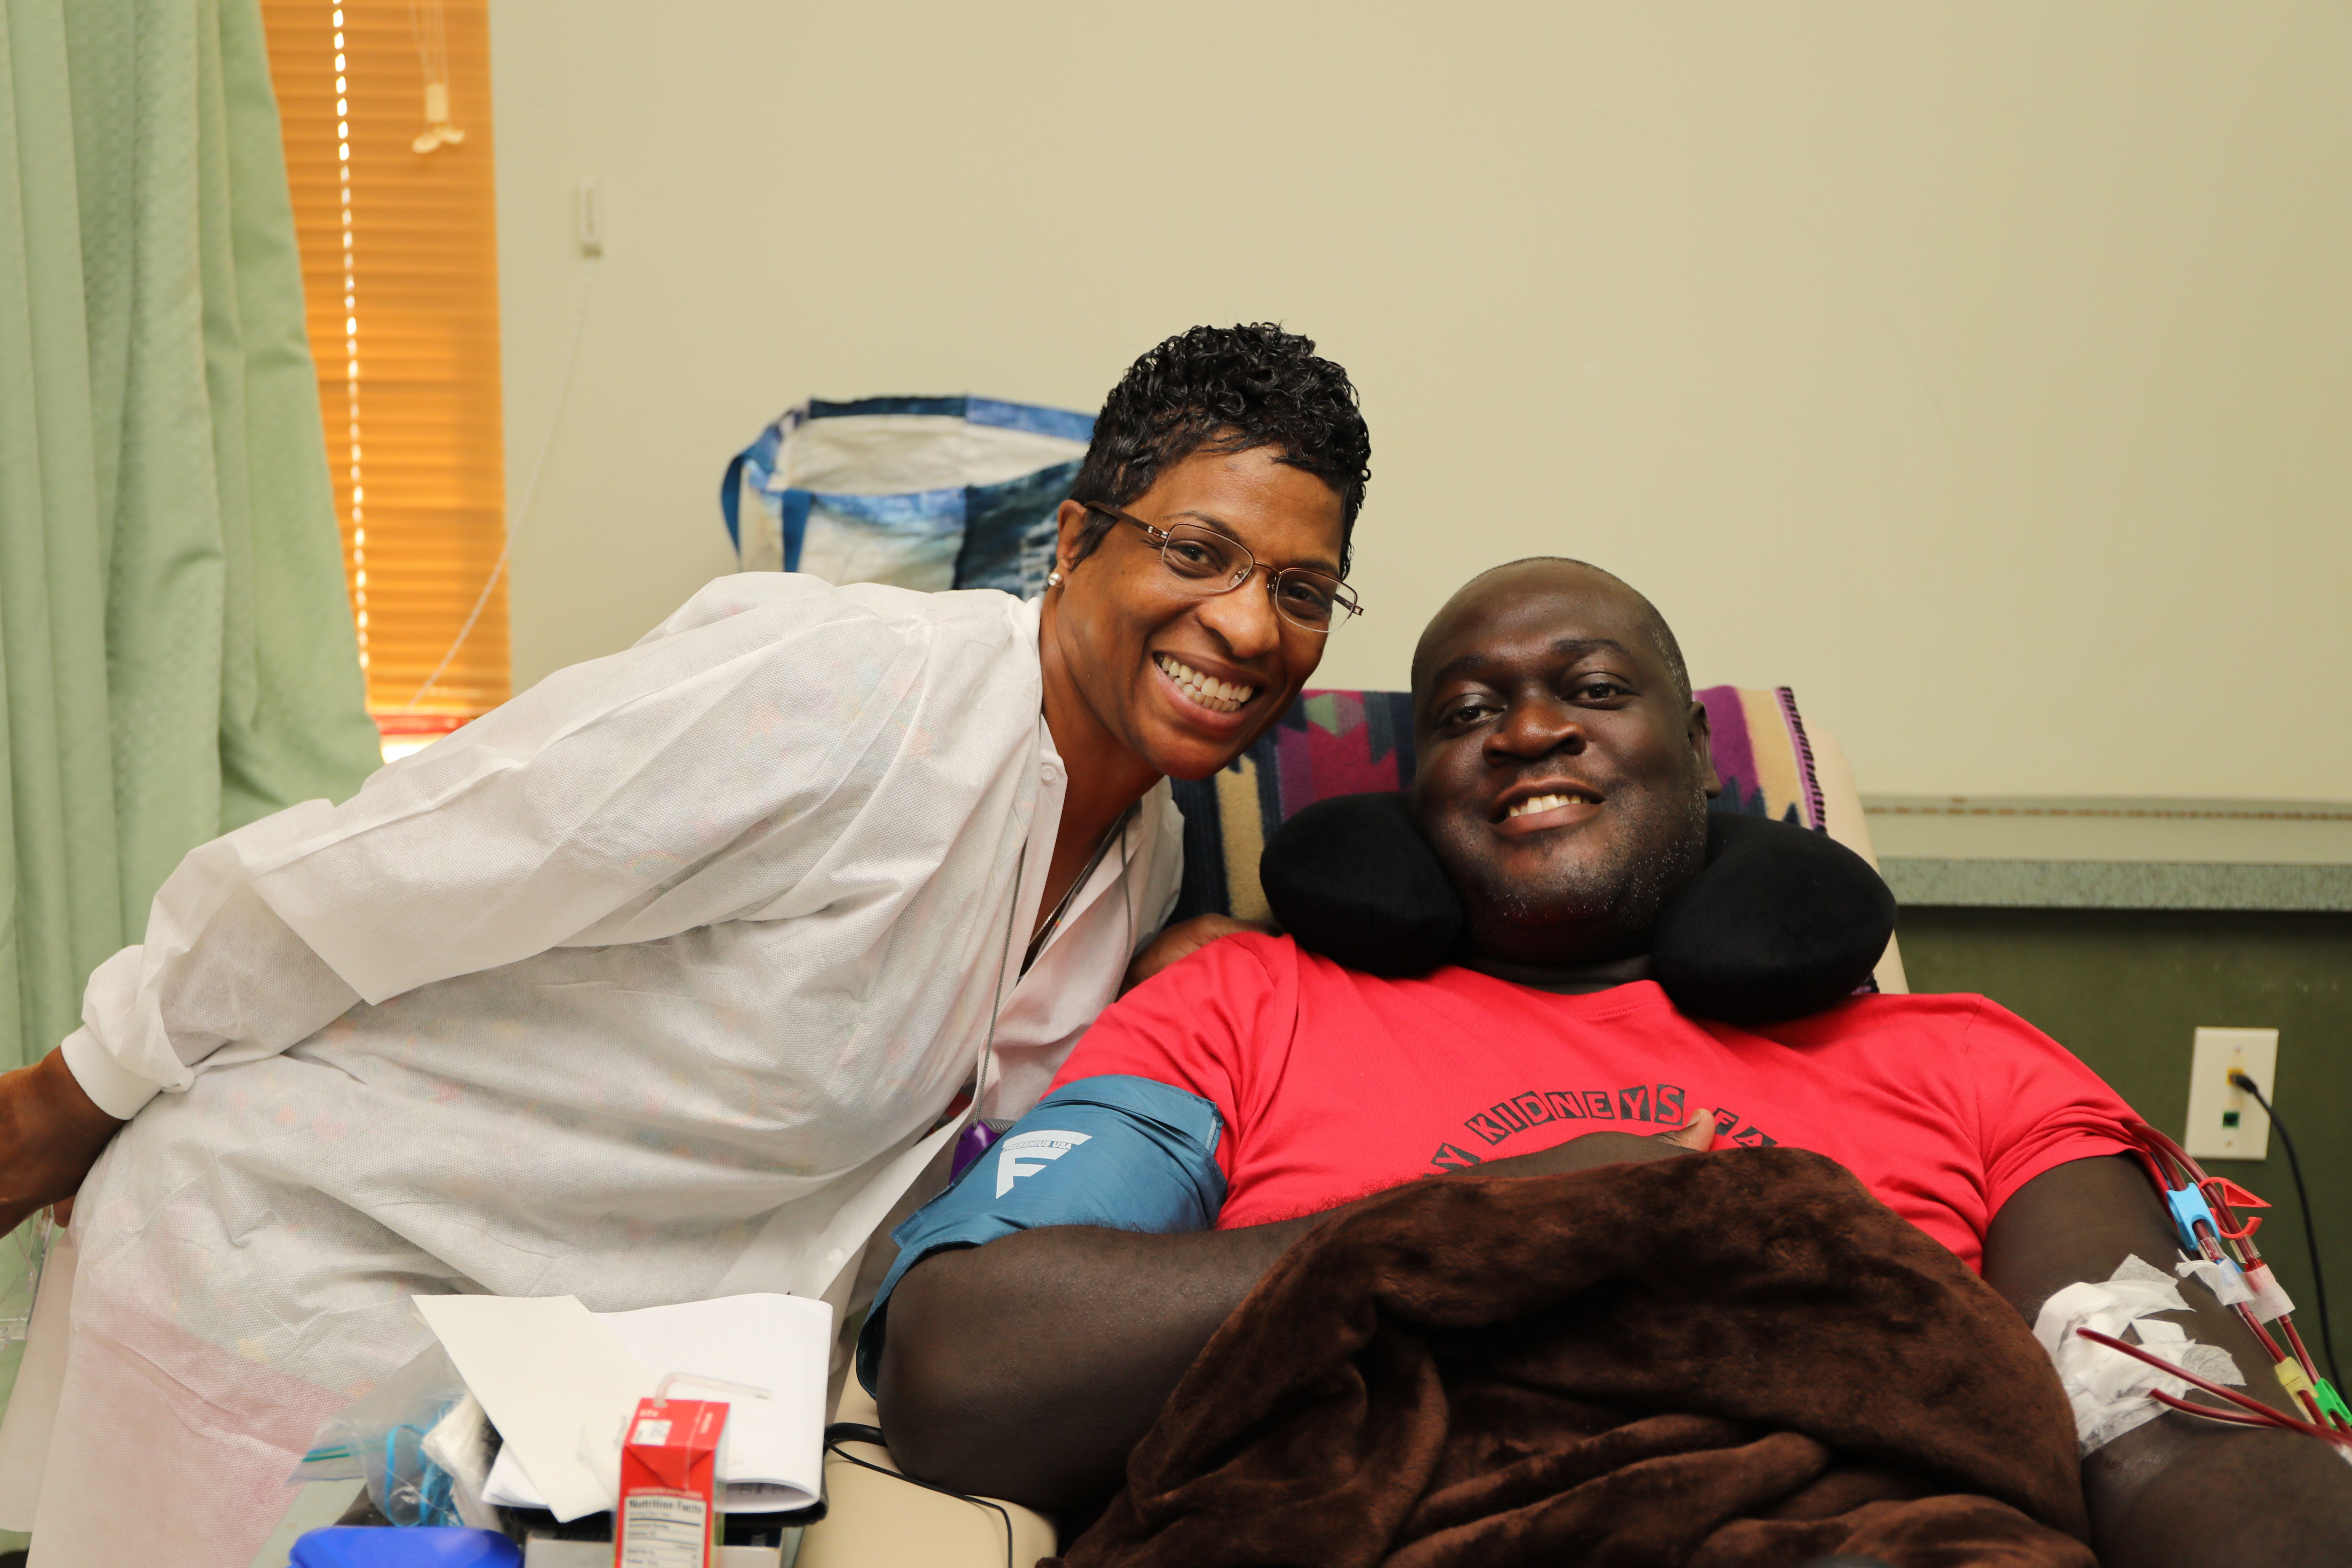 A black female healthcare worker leans in, smiling, to take a photo with a black male patient who is seated.